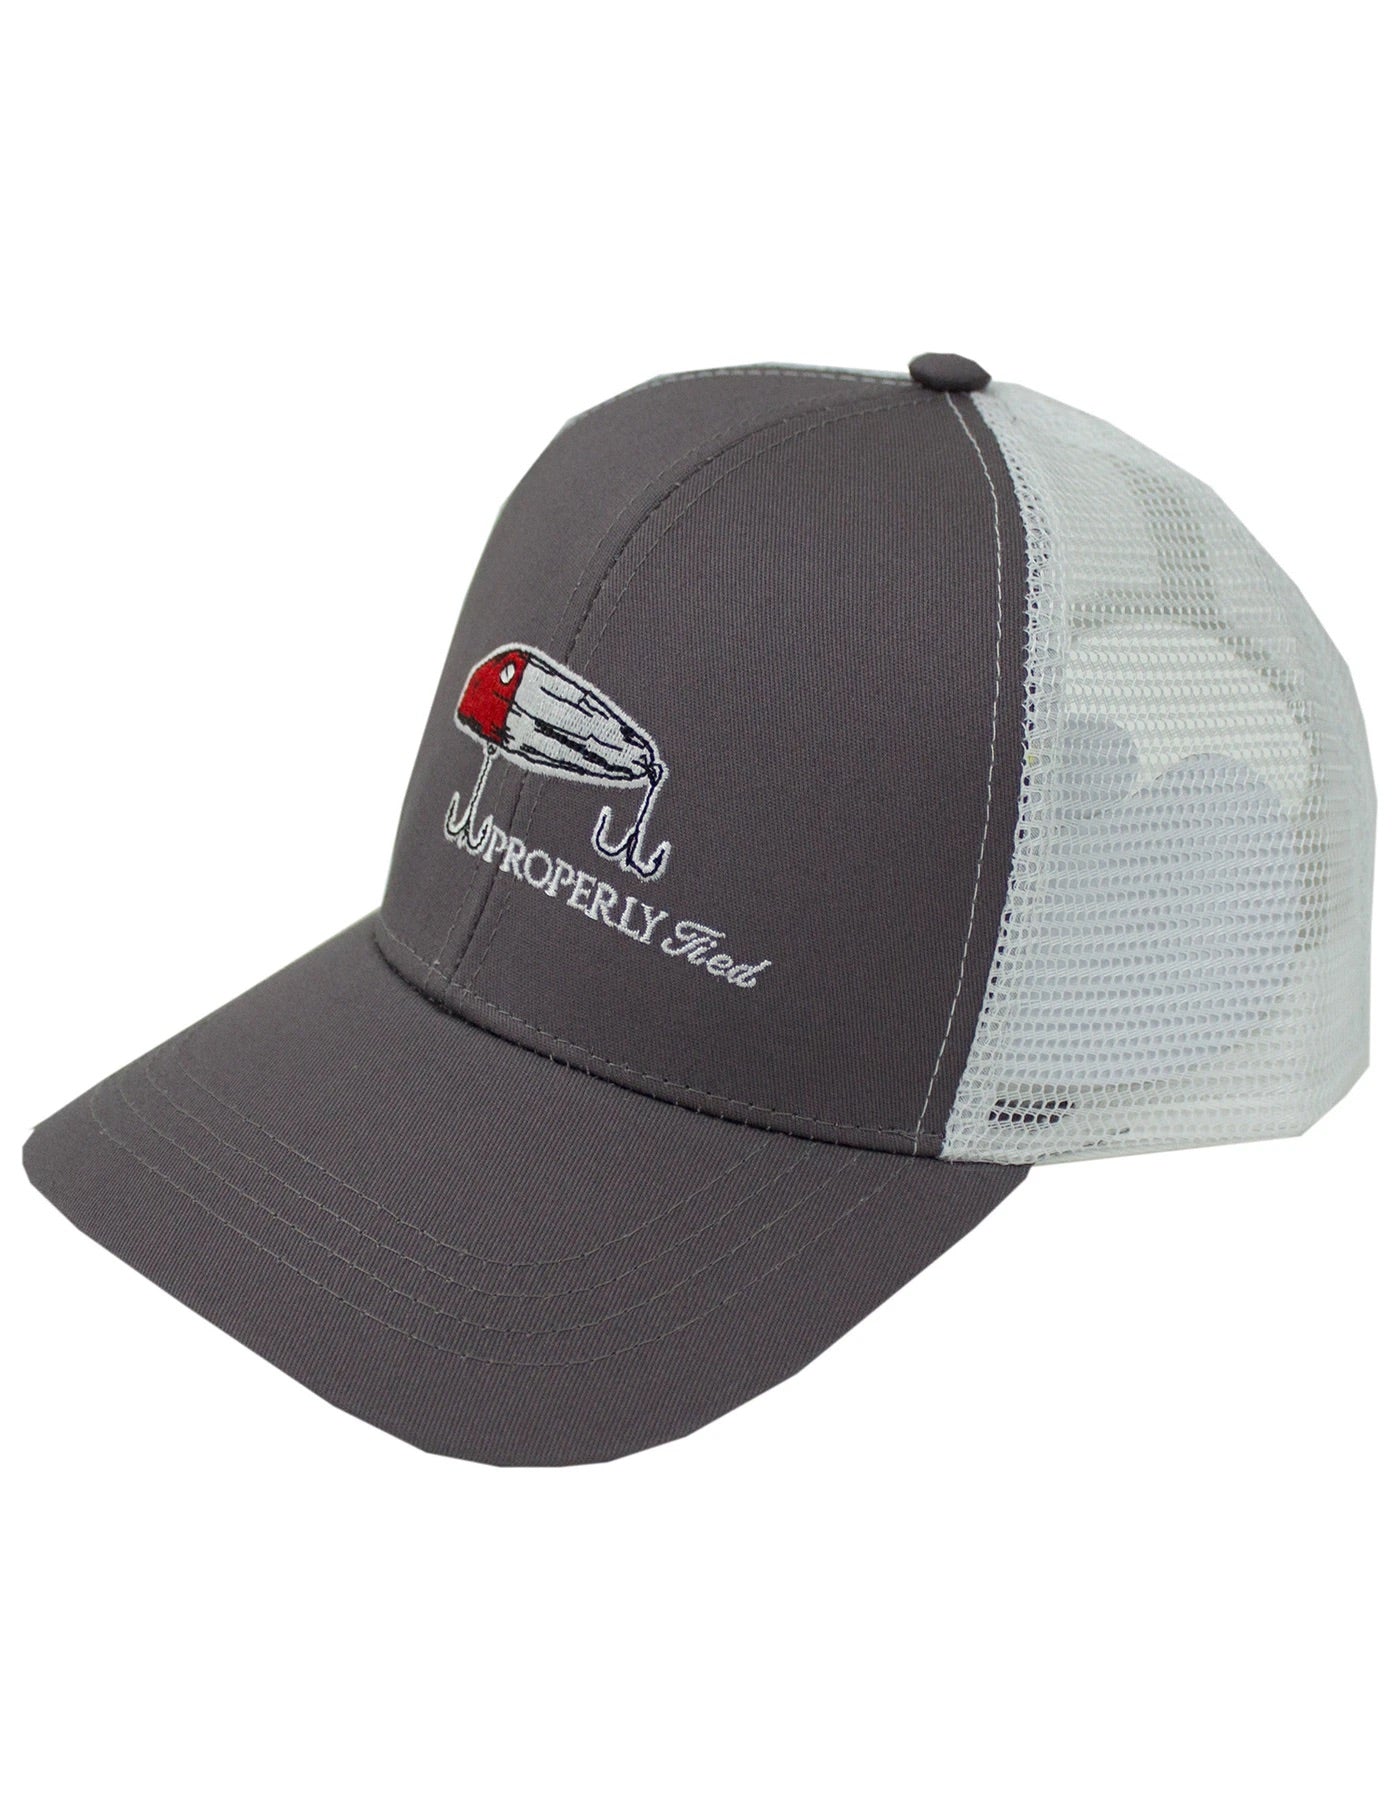 Properly Tied Fishing Lure Trucker Hat